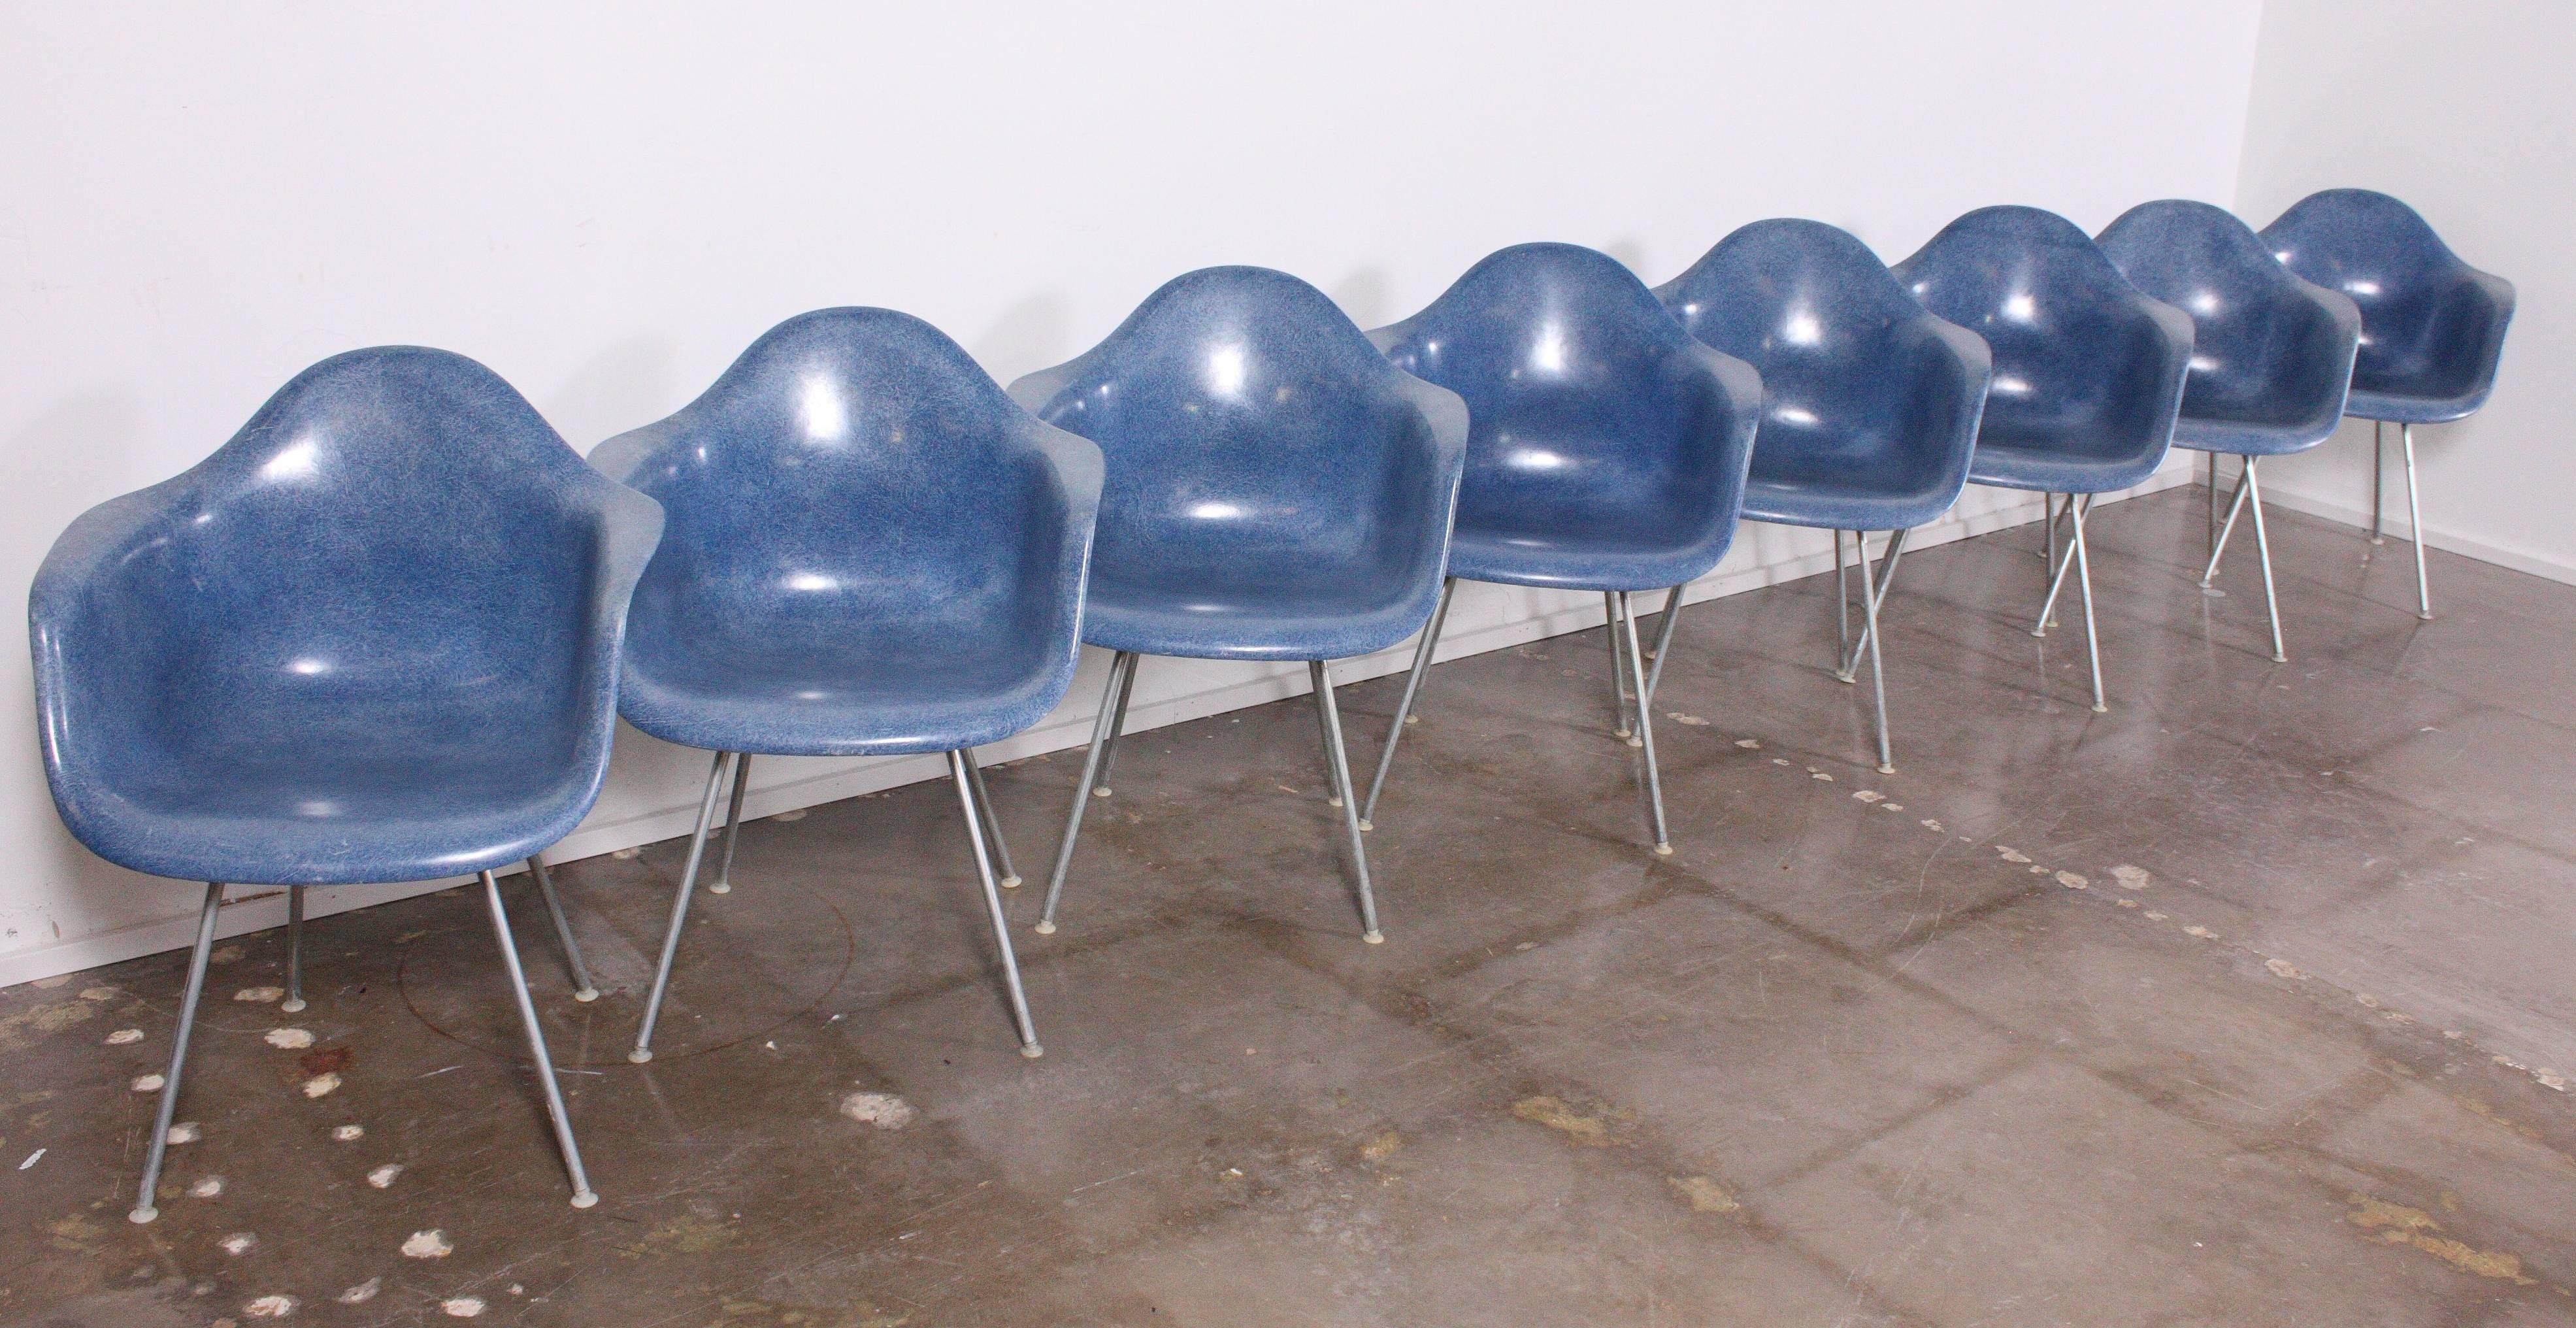 Mid-Century Modern Rare Blue Fiberglass Shell Chairs by Charles Eames for Herman Miller